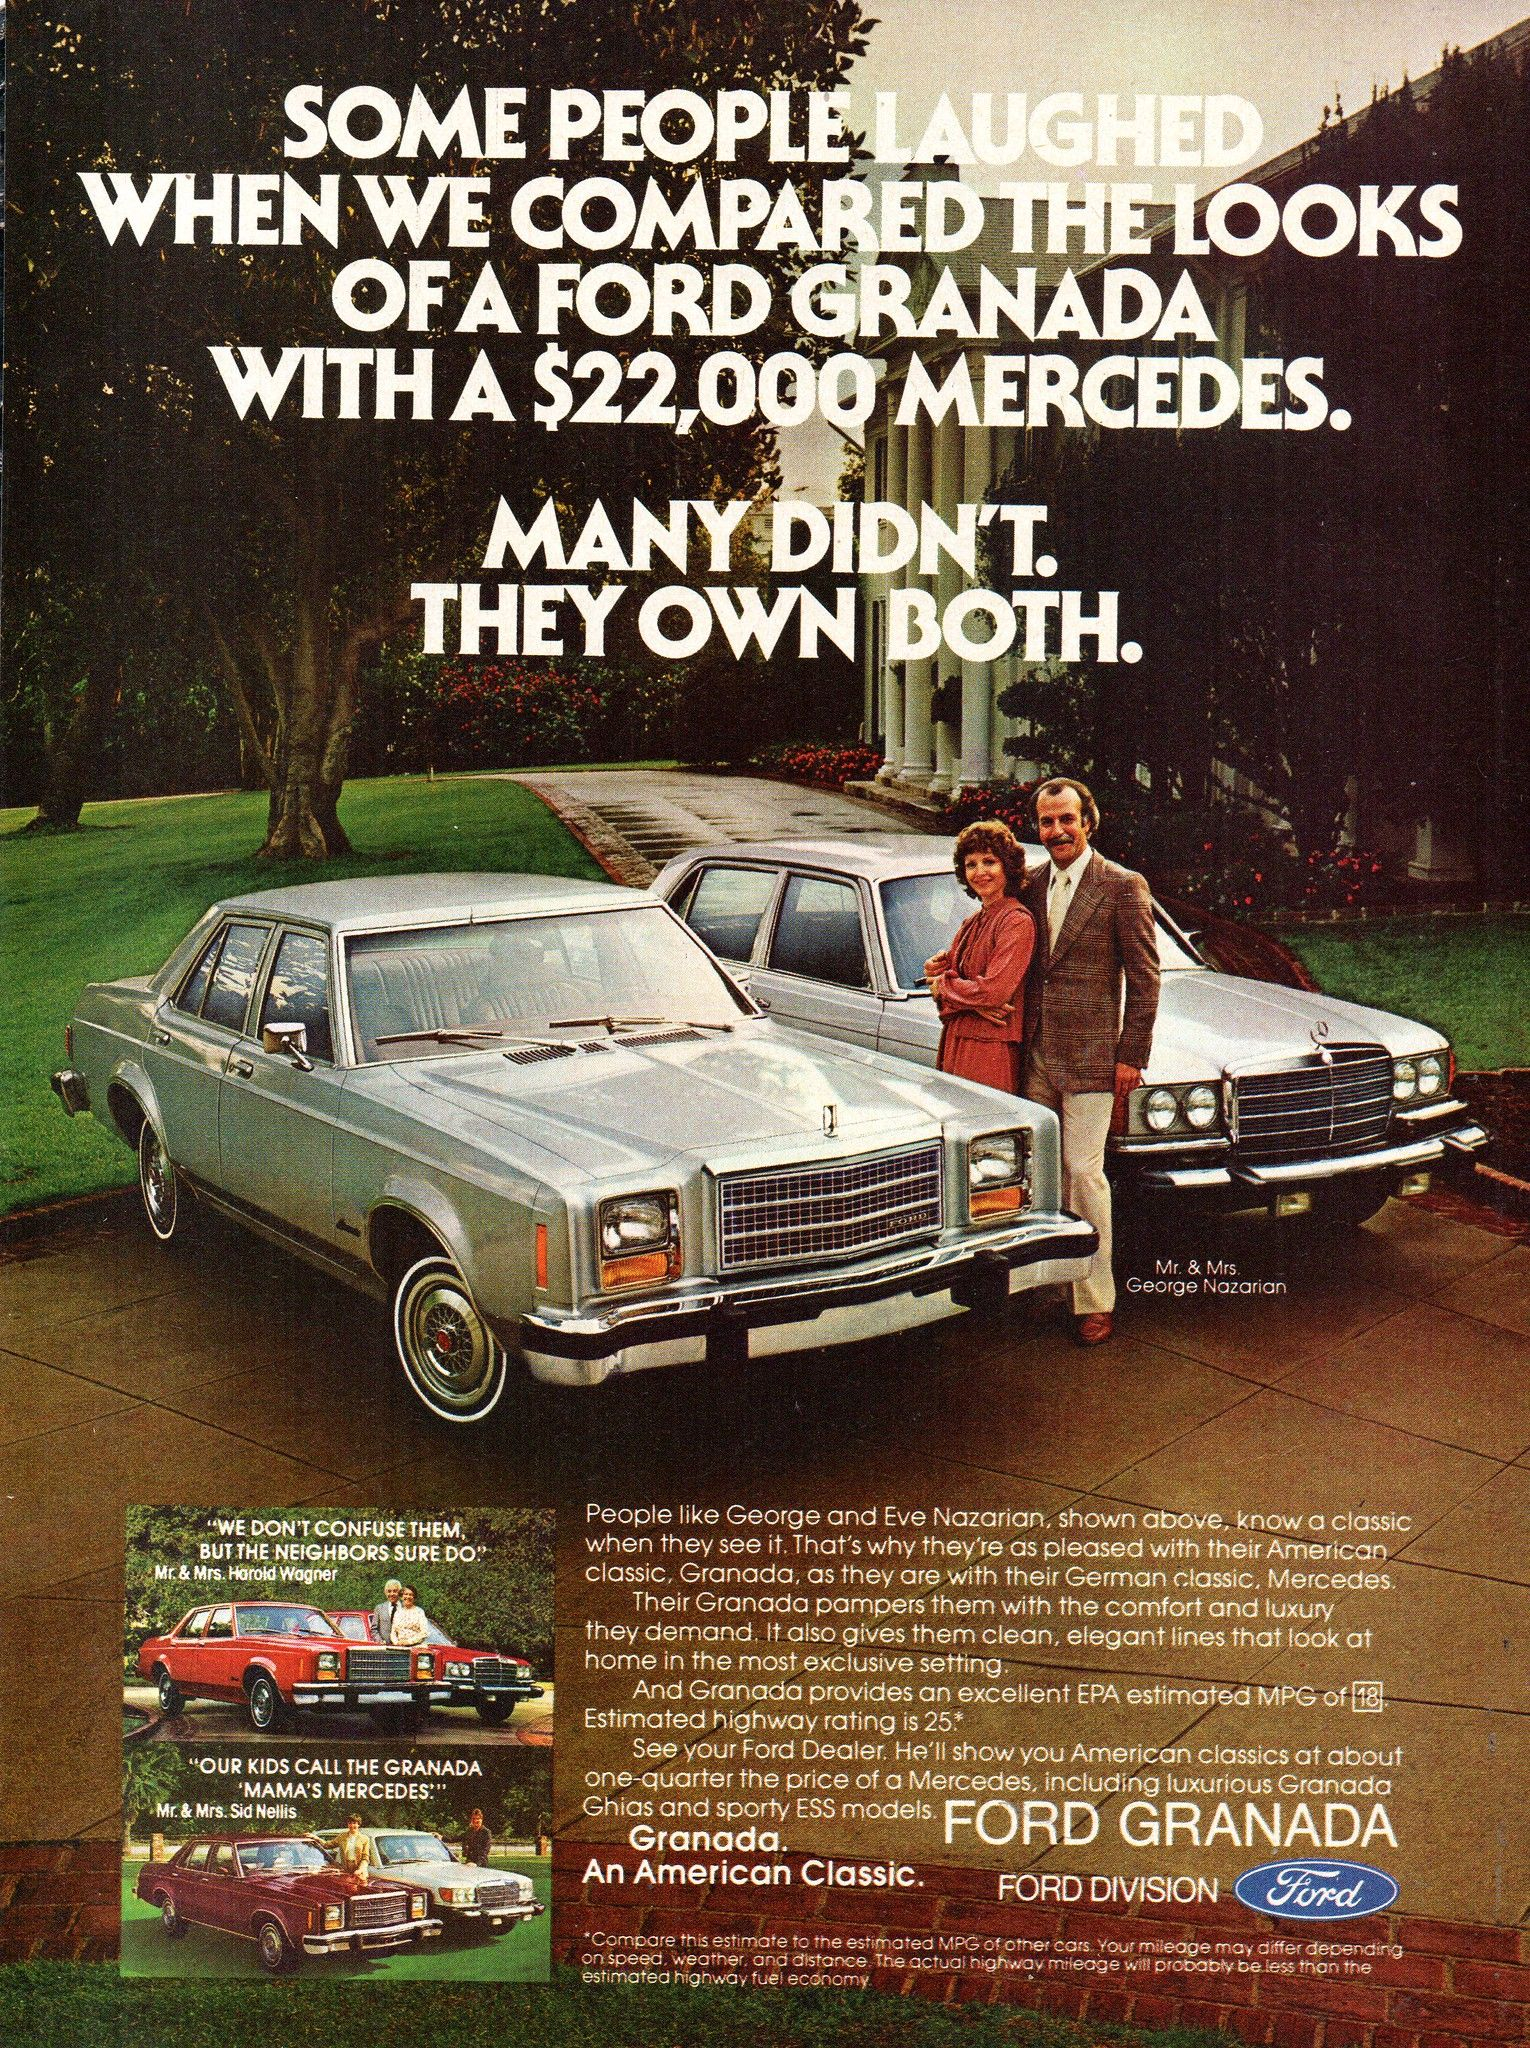 This May Have Been The Most Delusional Ford Advertising Campaign Ever